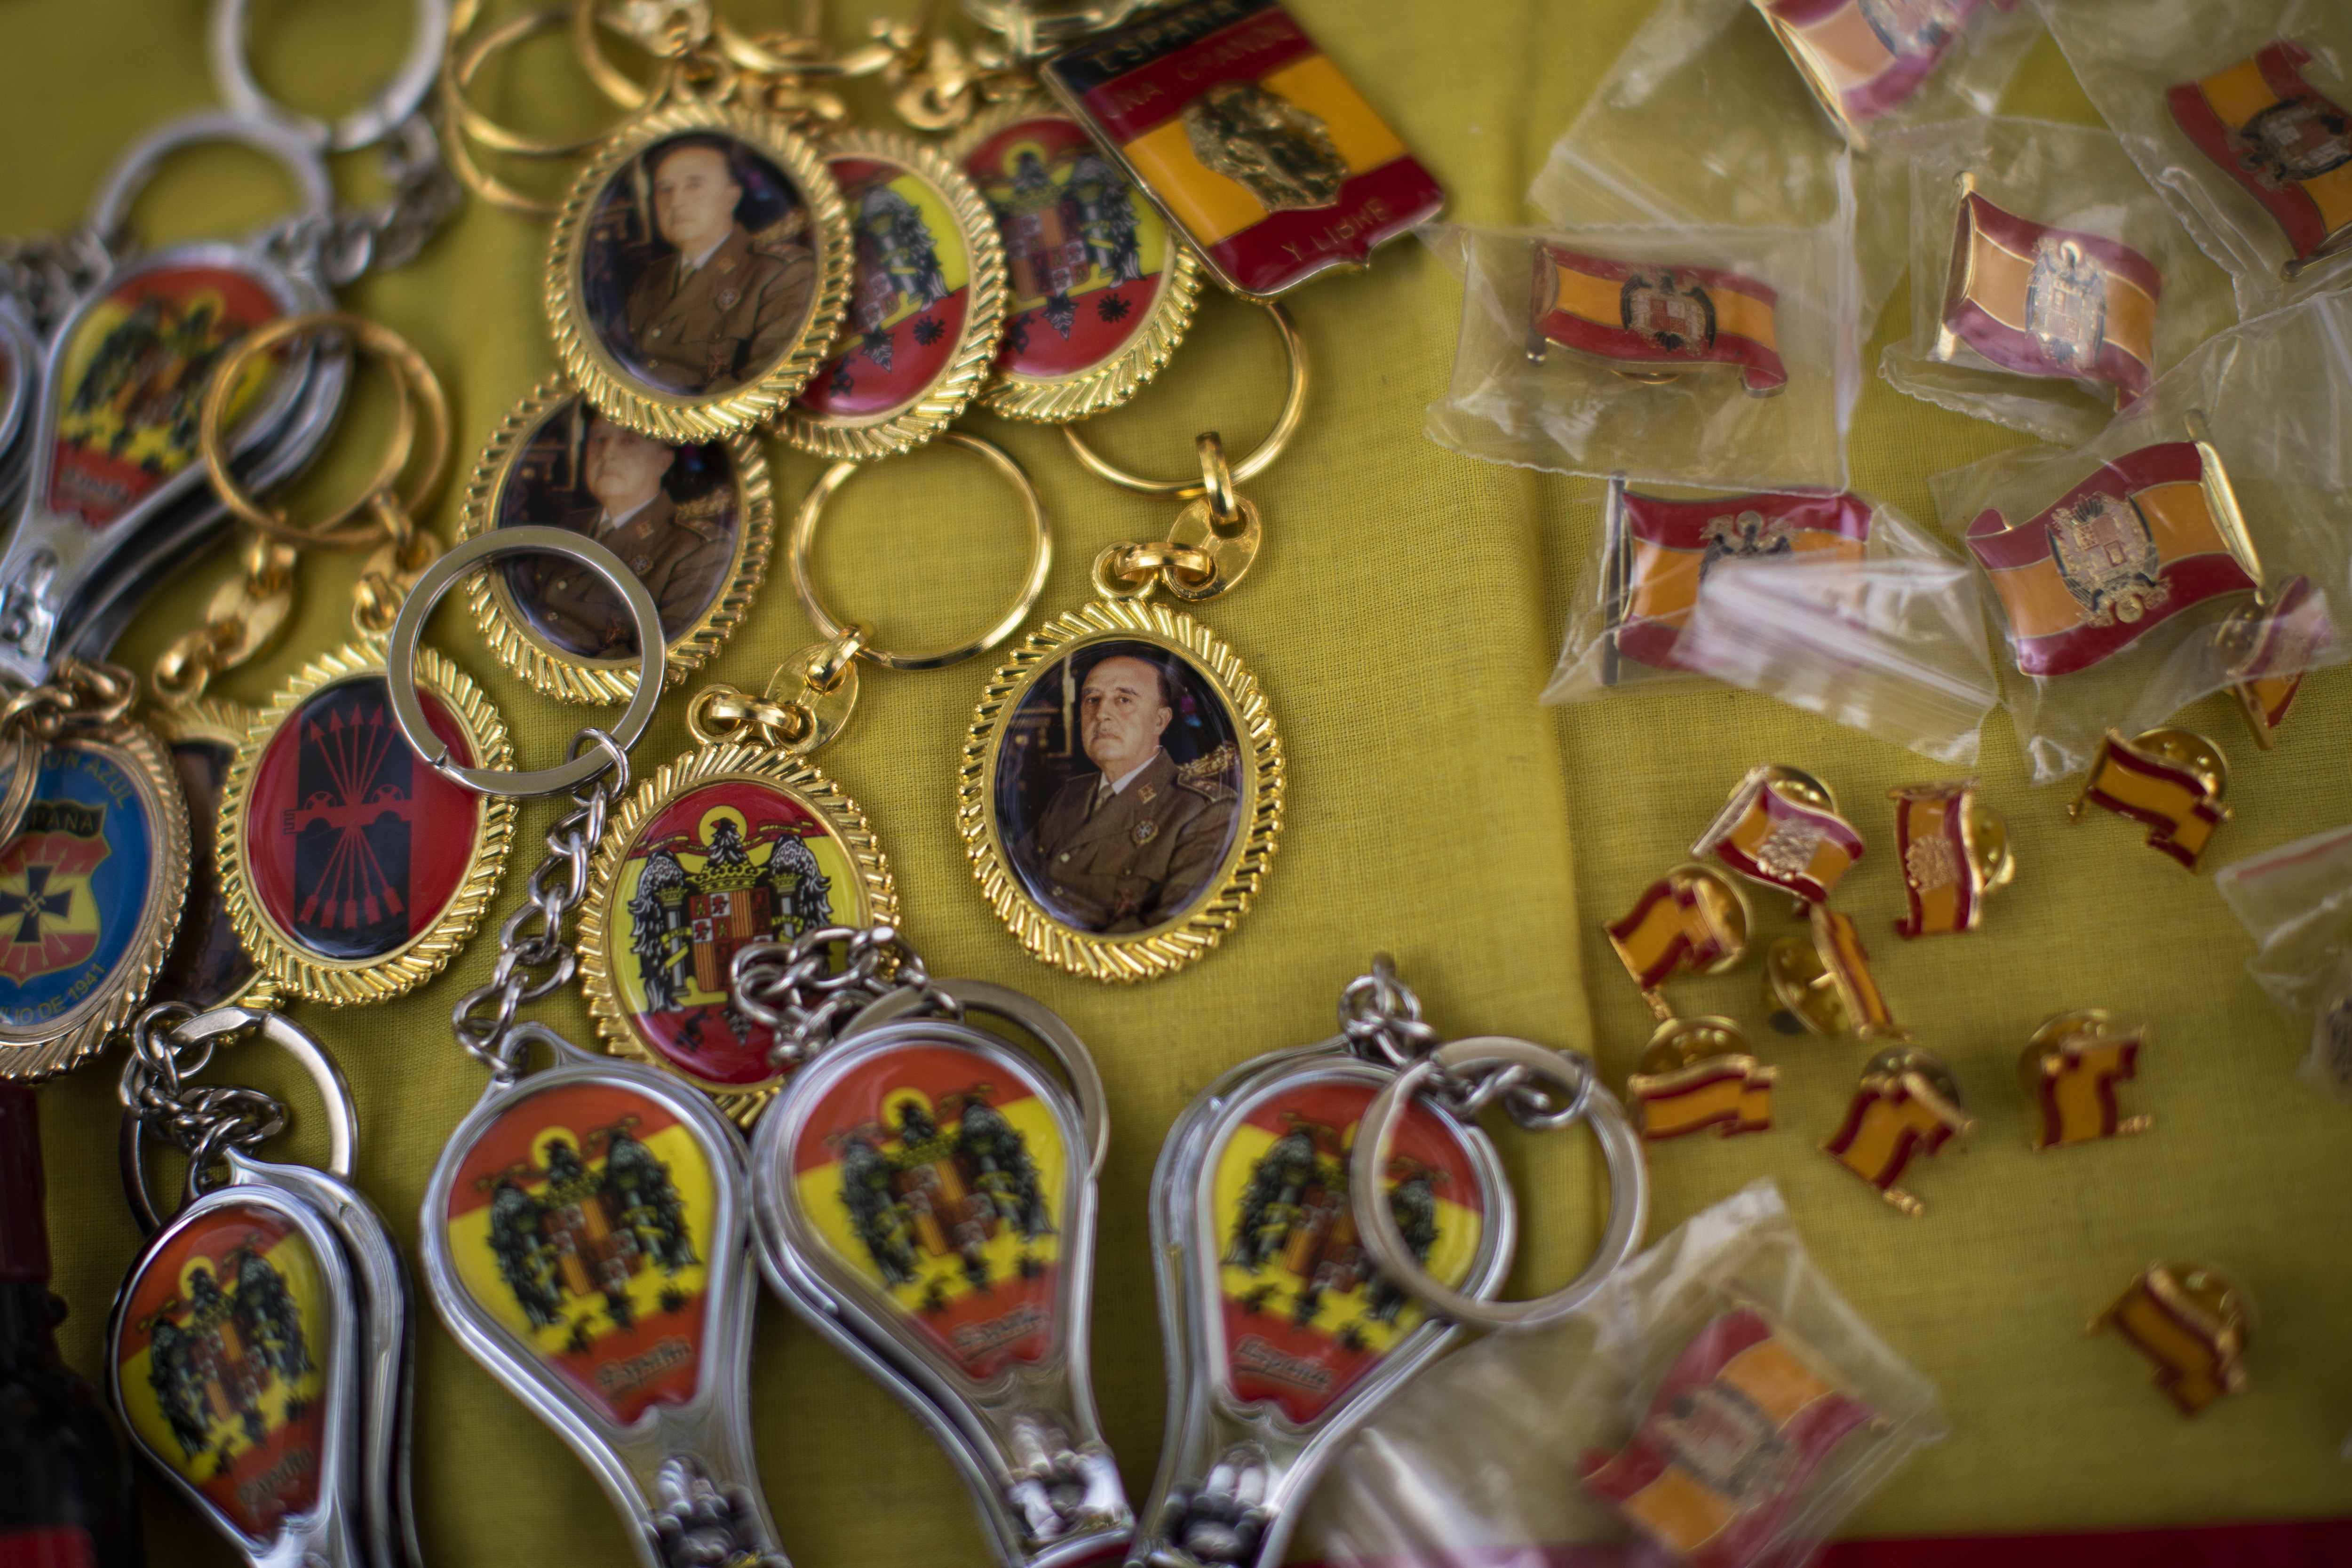 Key rings with photos of former Spanish dictator Francisco Franco are displayed for sale in a street stall during an alternative celebration for Spain's National Day in Barcelona, Spain, Saturday, Oct. 12, 2019. Spain commemorates Christopher Columbus' arrival in the New World and also Spain's armed forces day. (AP Photo/Emilio Morenatti)